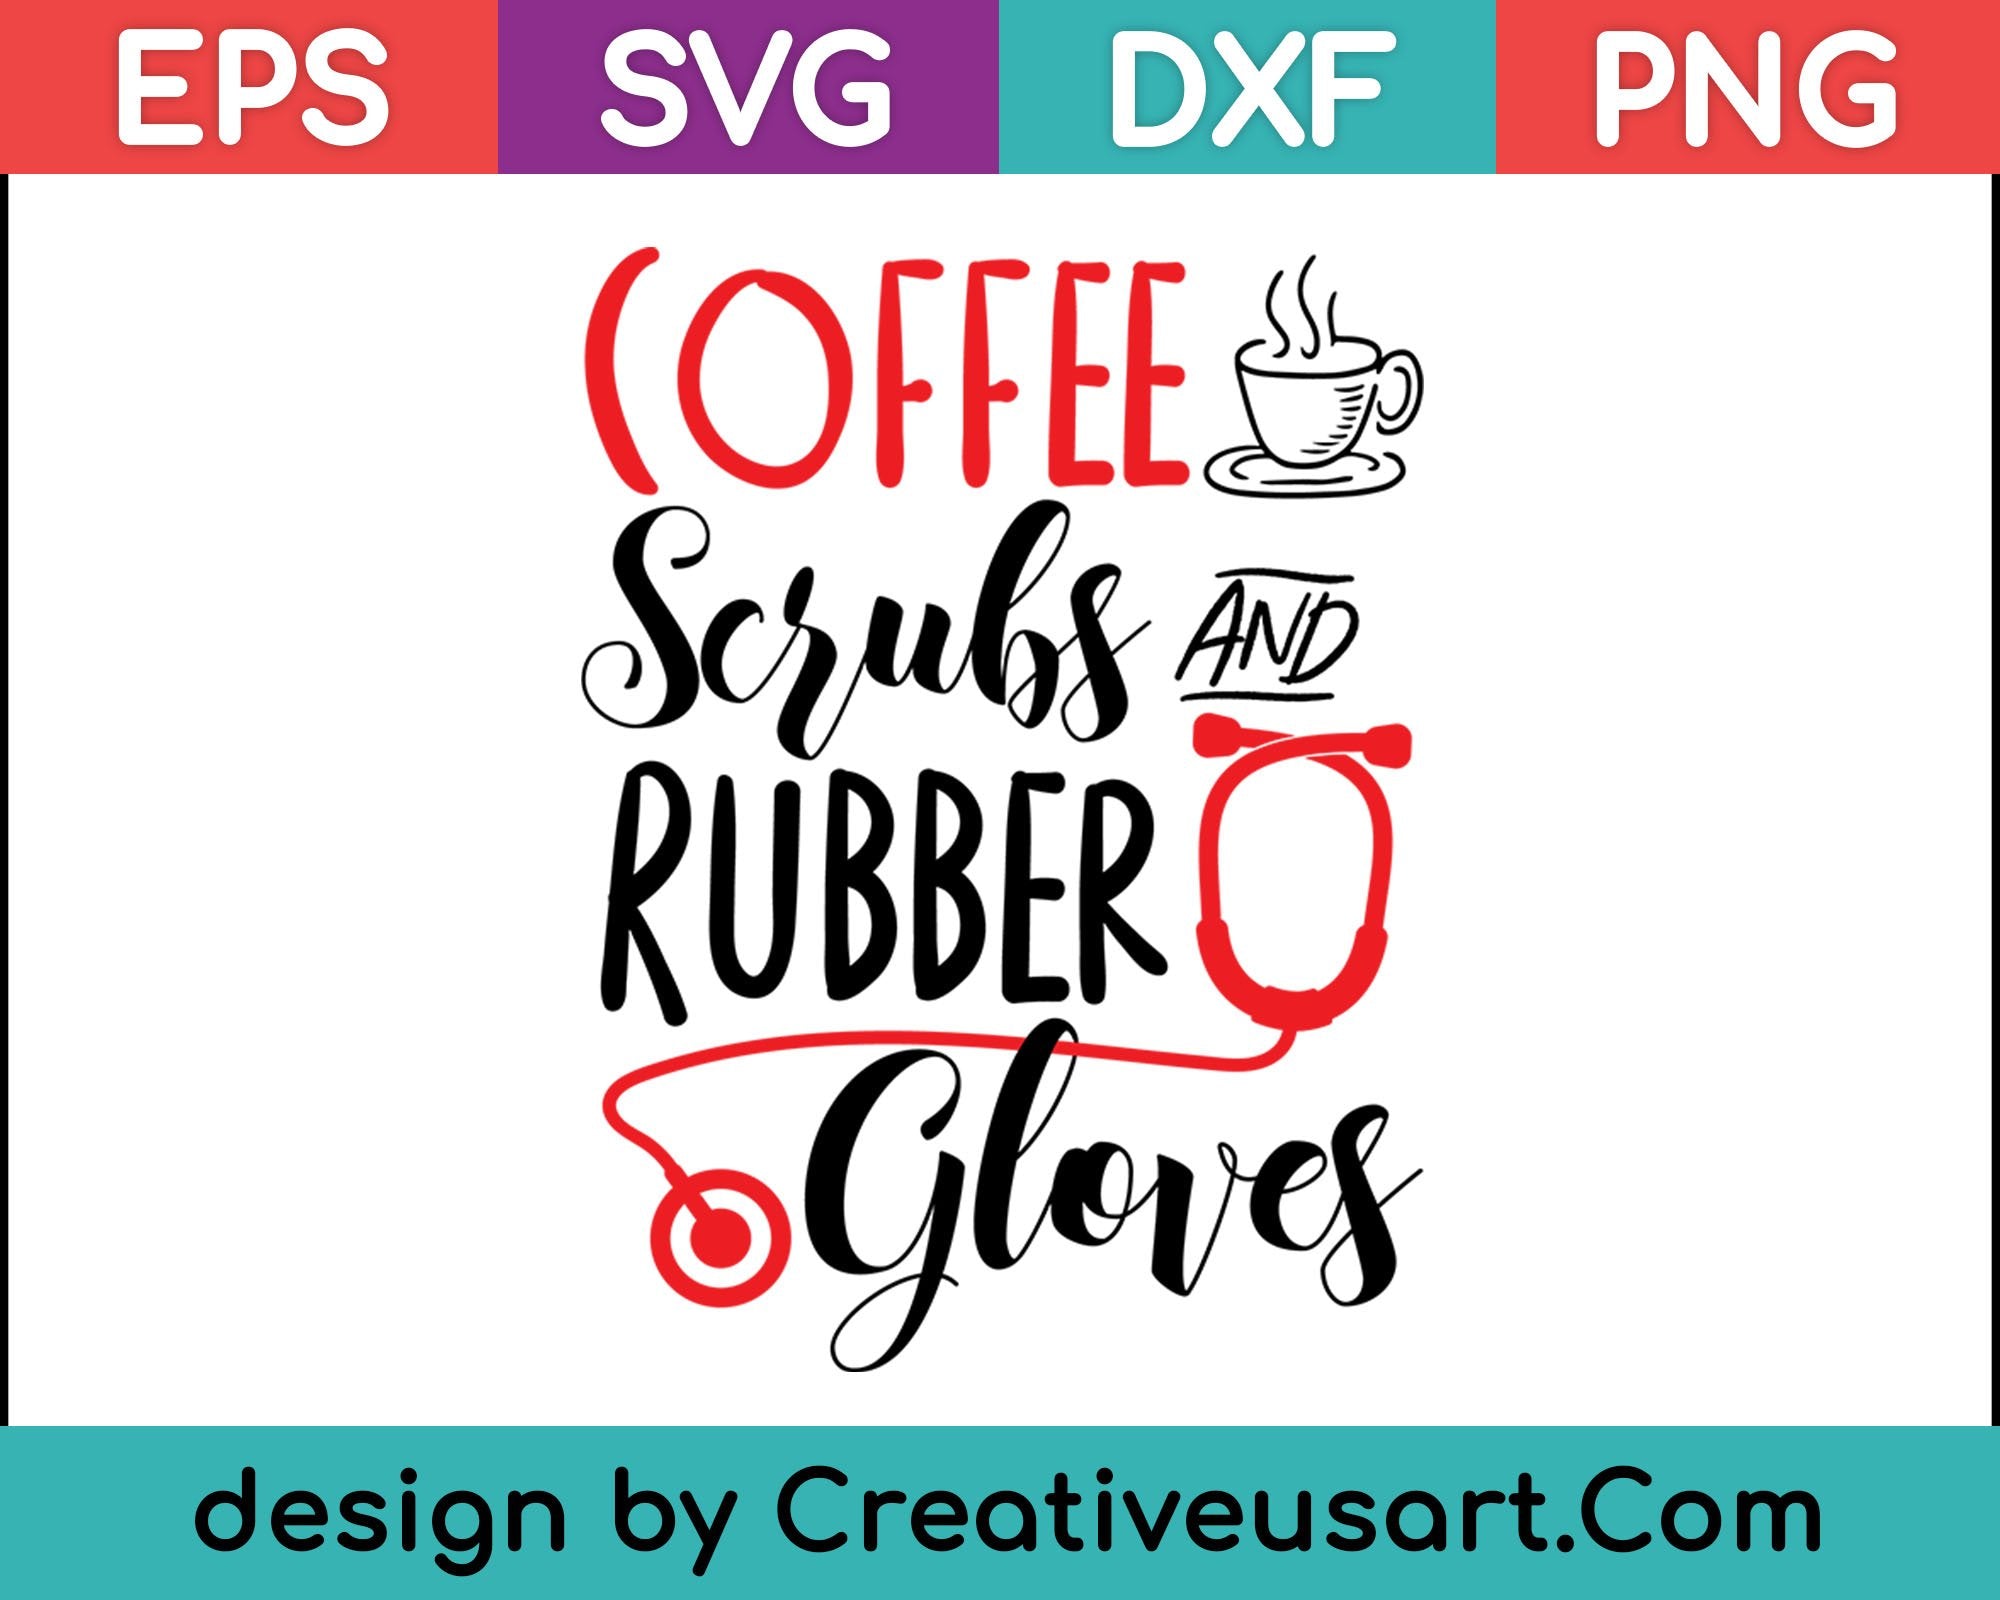 Download Coffee Scrubs And Rubber Gloves Svg Files Creativeusarts